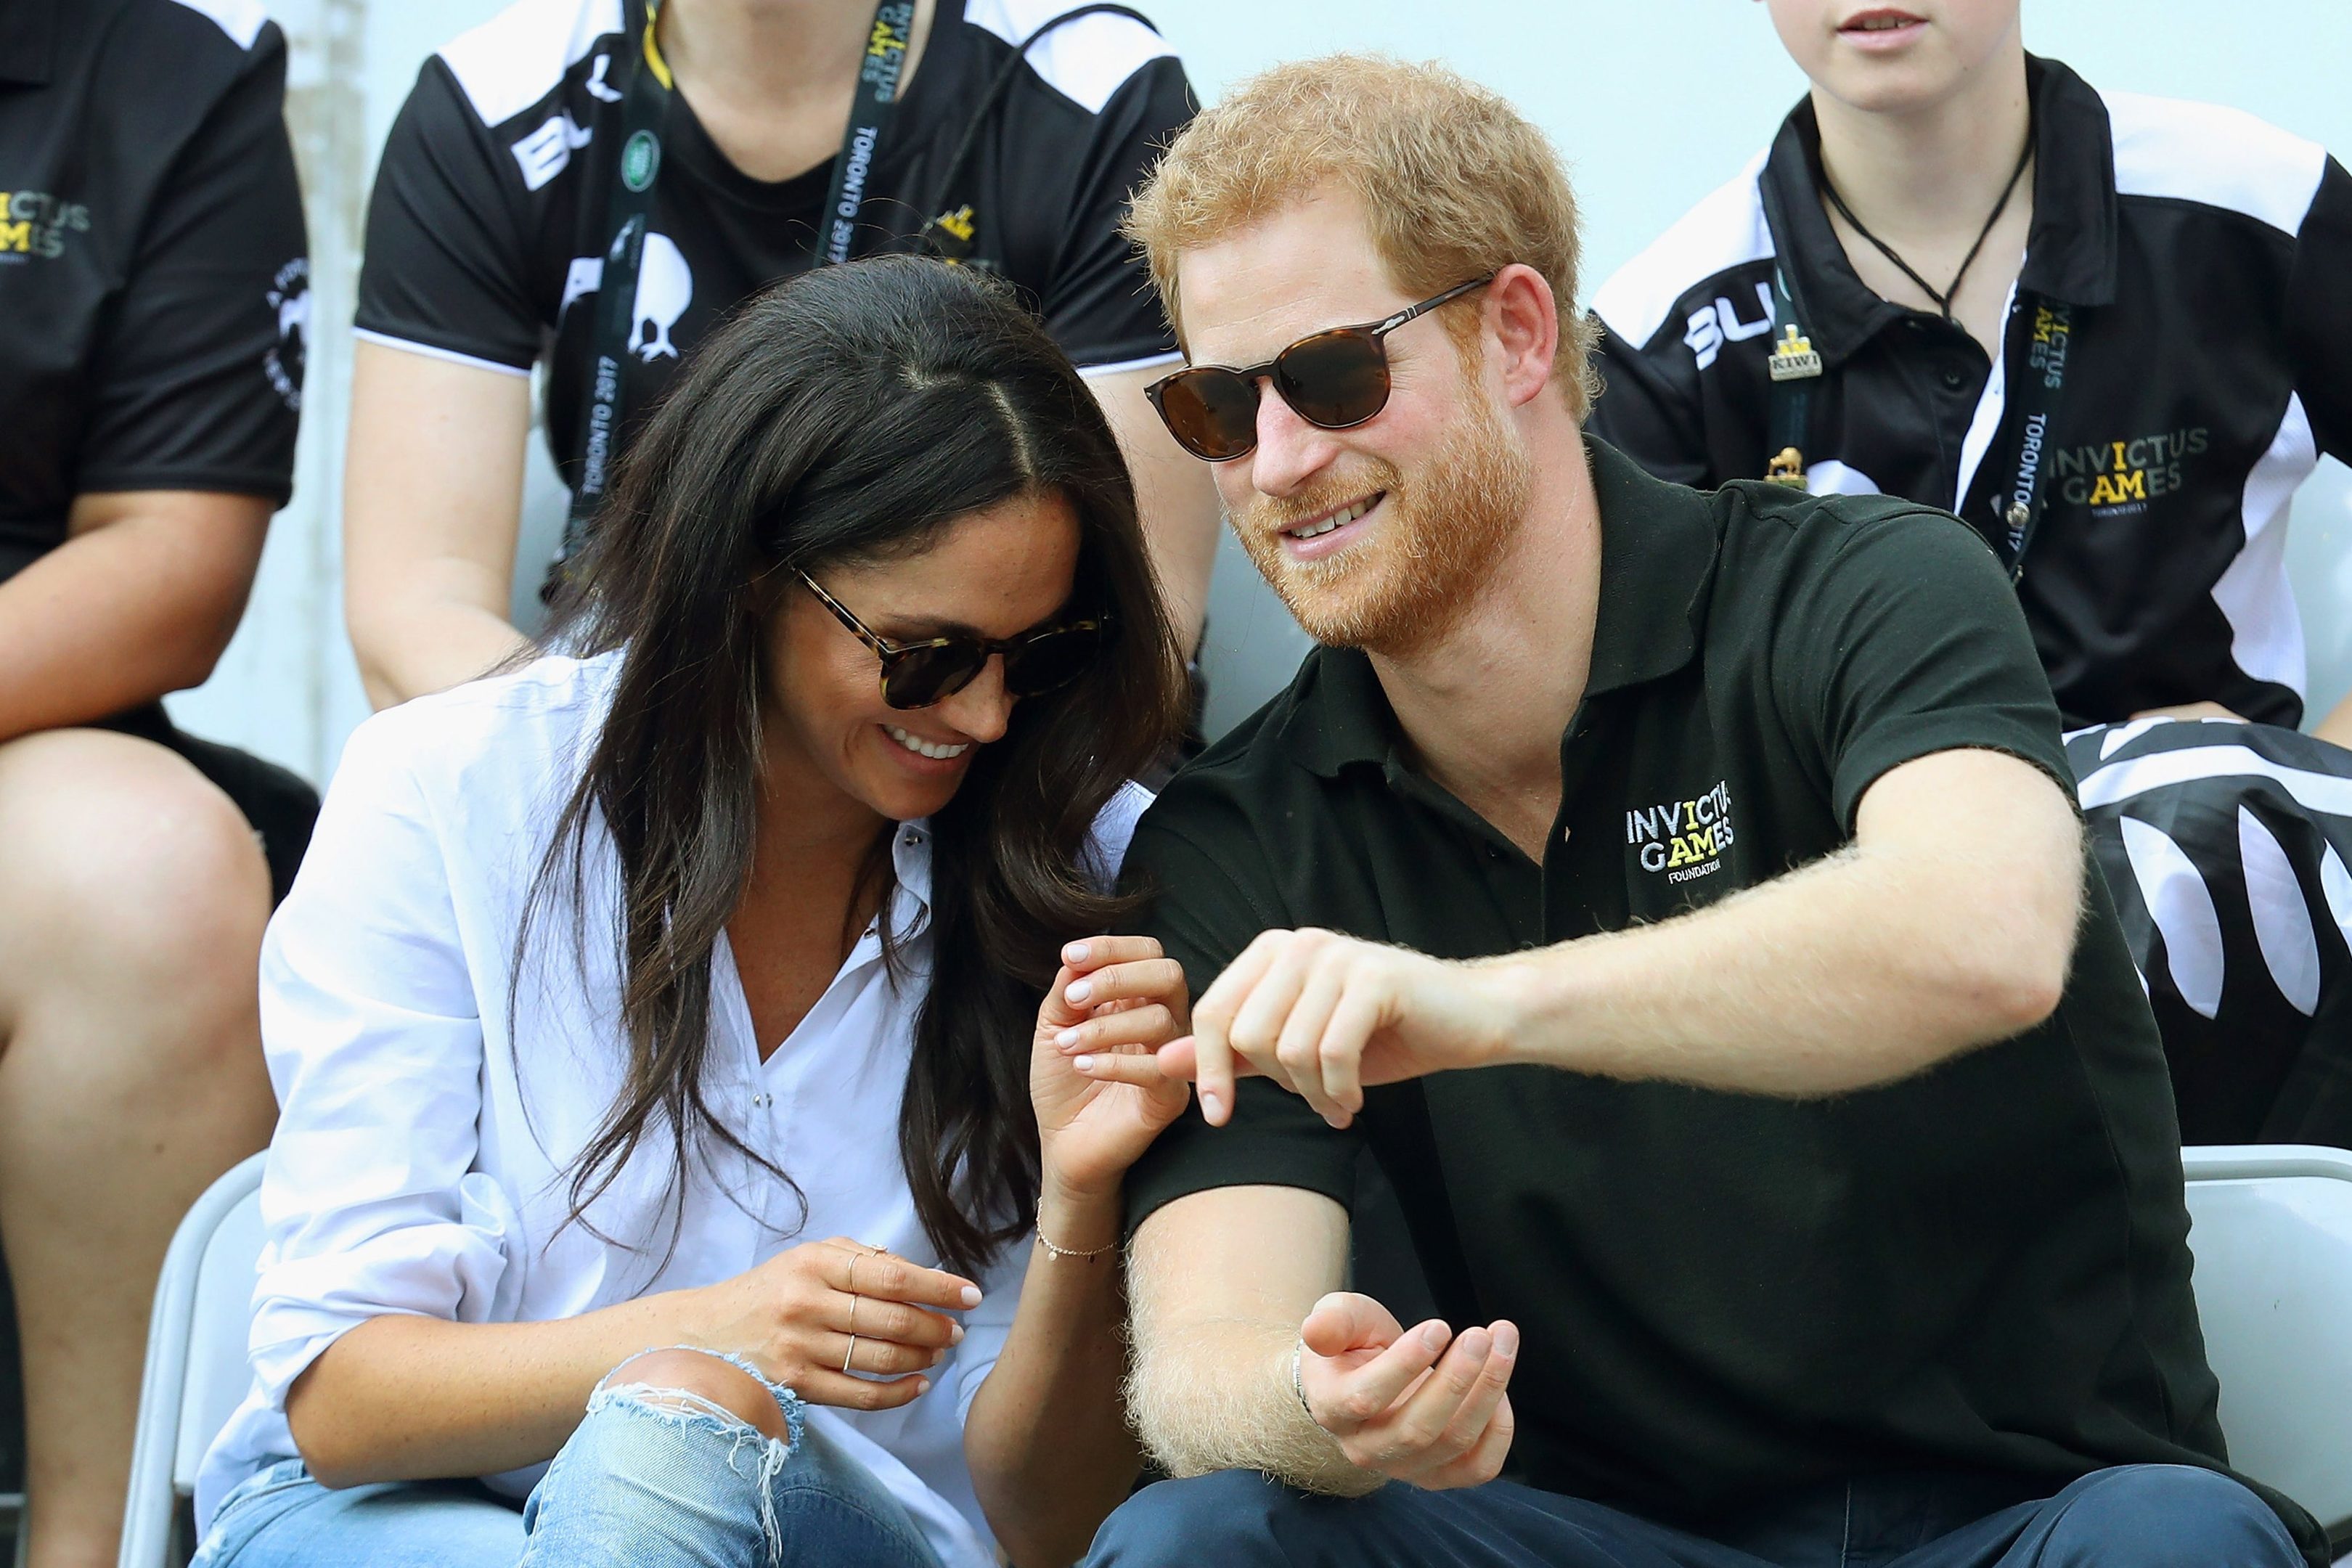 Prince Harry (R) and Meghan Markle (L) attend a Wheelchair Tennis match during the Invictus Games 2017 at Nathan Philips Square on September 25, 2017 in Toronto, Canada  (Photo by Chris Jackson/Getty Images for the Invictus Games Foundation )